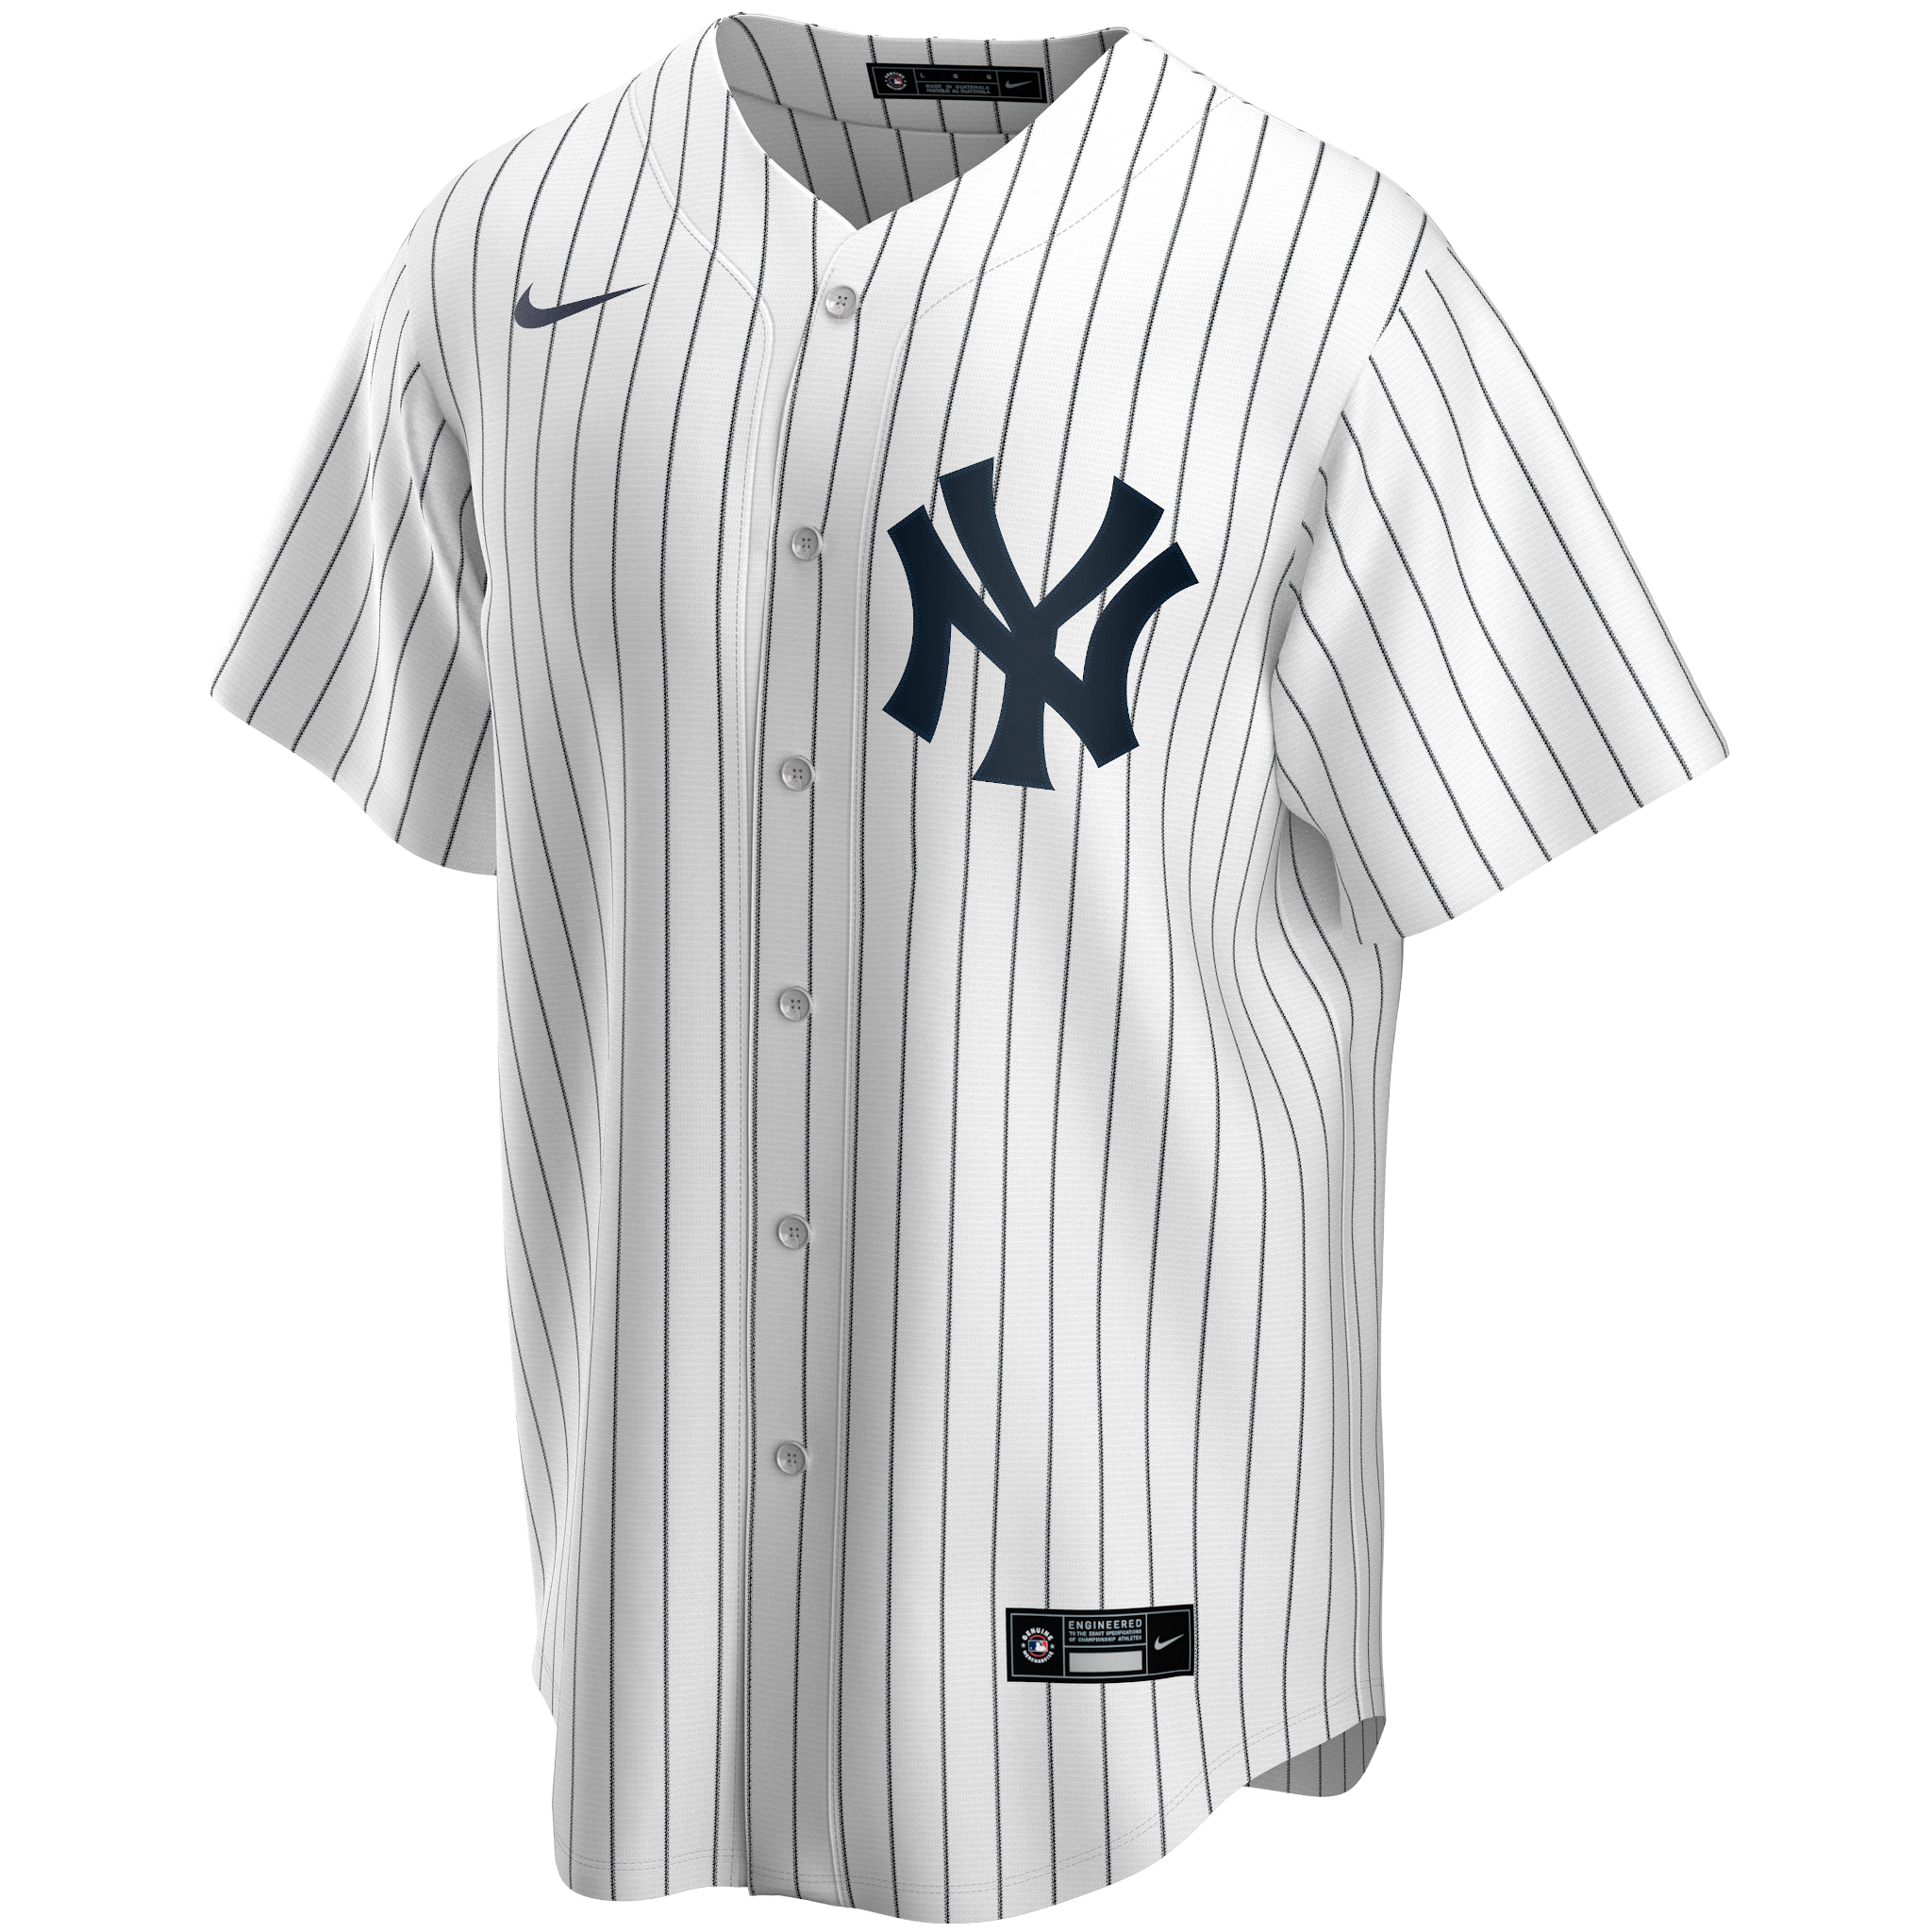 Fanatics Authentic Carlos Rodon New York Yankees Game-Used #55 White Pinstripe Jersey vs. Tampa Bay Rays on August 1, 2023